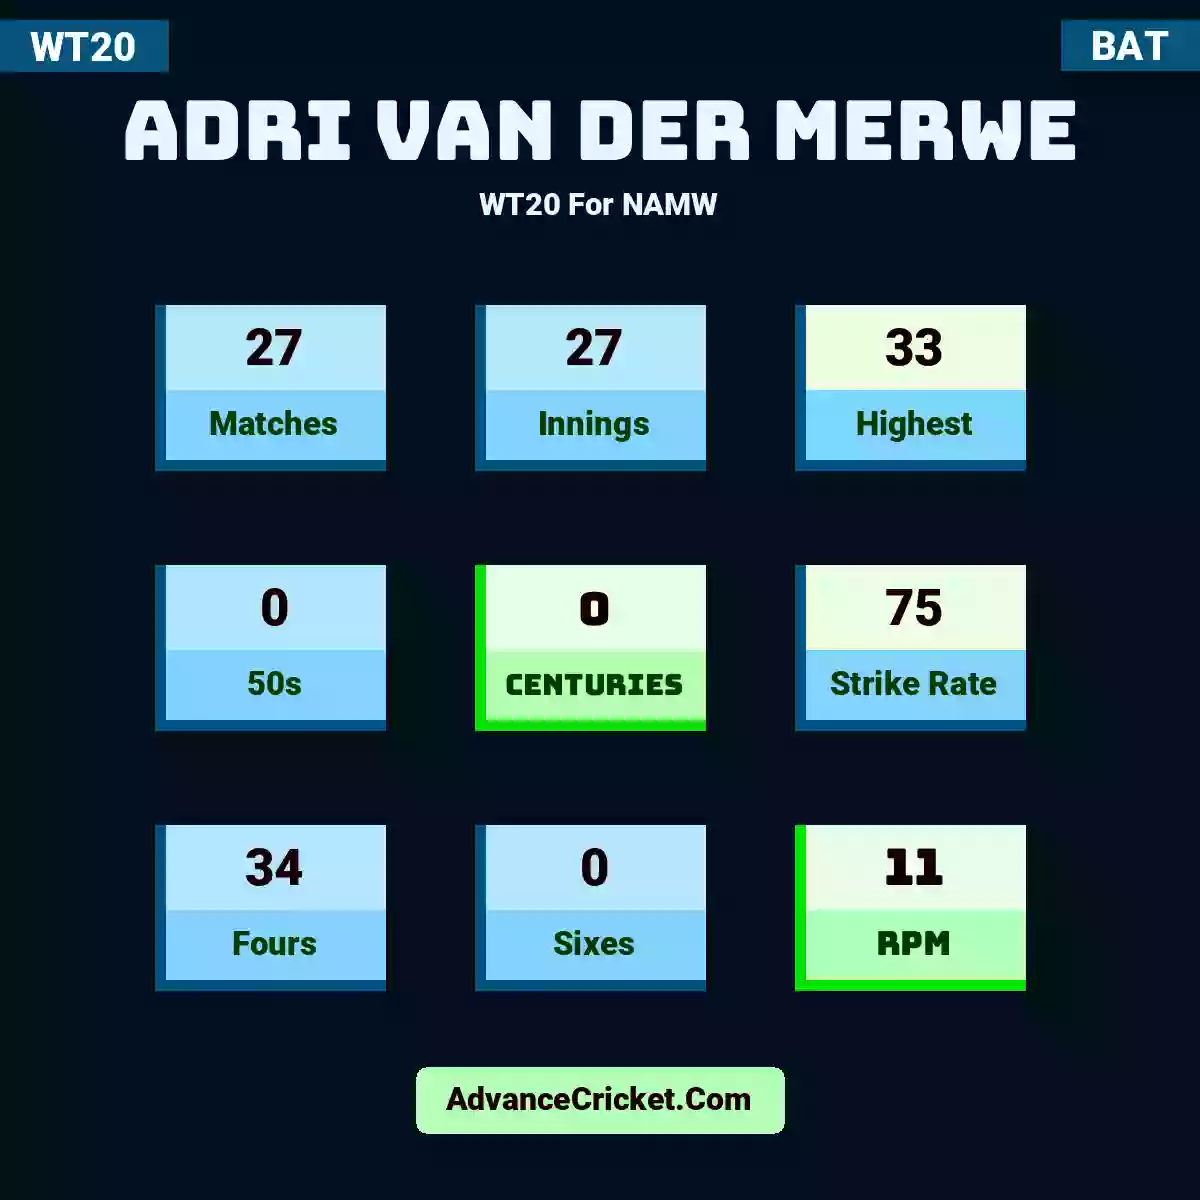 Adri van der Merwe WT20  For NAMW, Adri van der Merwe played 27 matches, scored 33 runs as highest, 0 half-centuries, and 0 centuries, with a strike rate of 75. A.Merwe hit 34 fours and 0 sixes, with an RPM of 11.